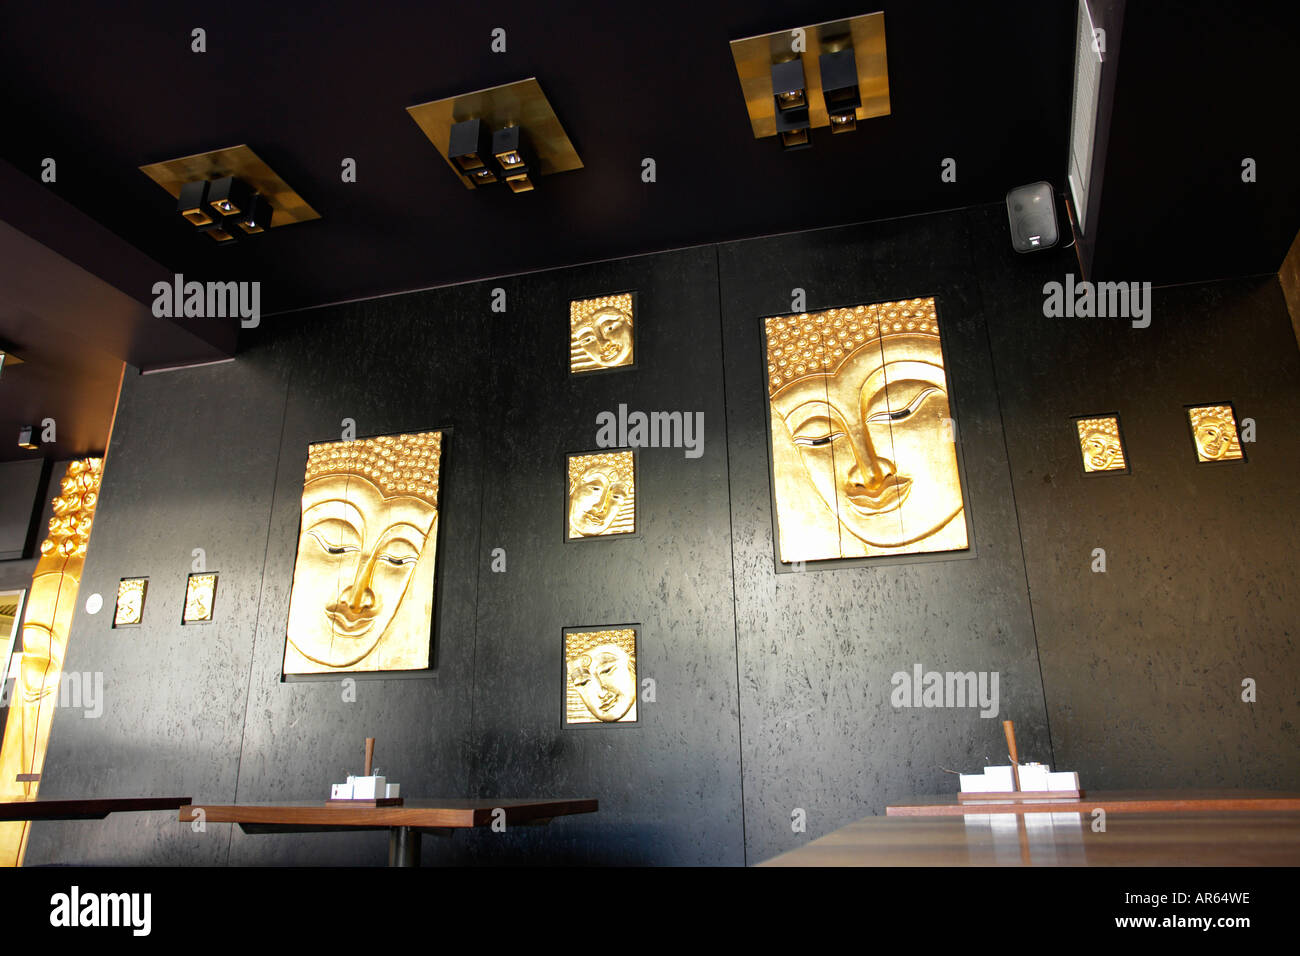 Trendy restaurant with Buddha images as decoration Stock Photo